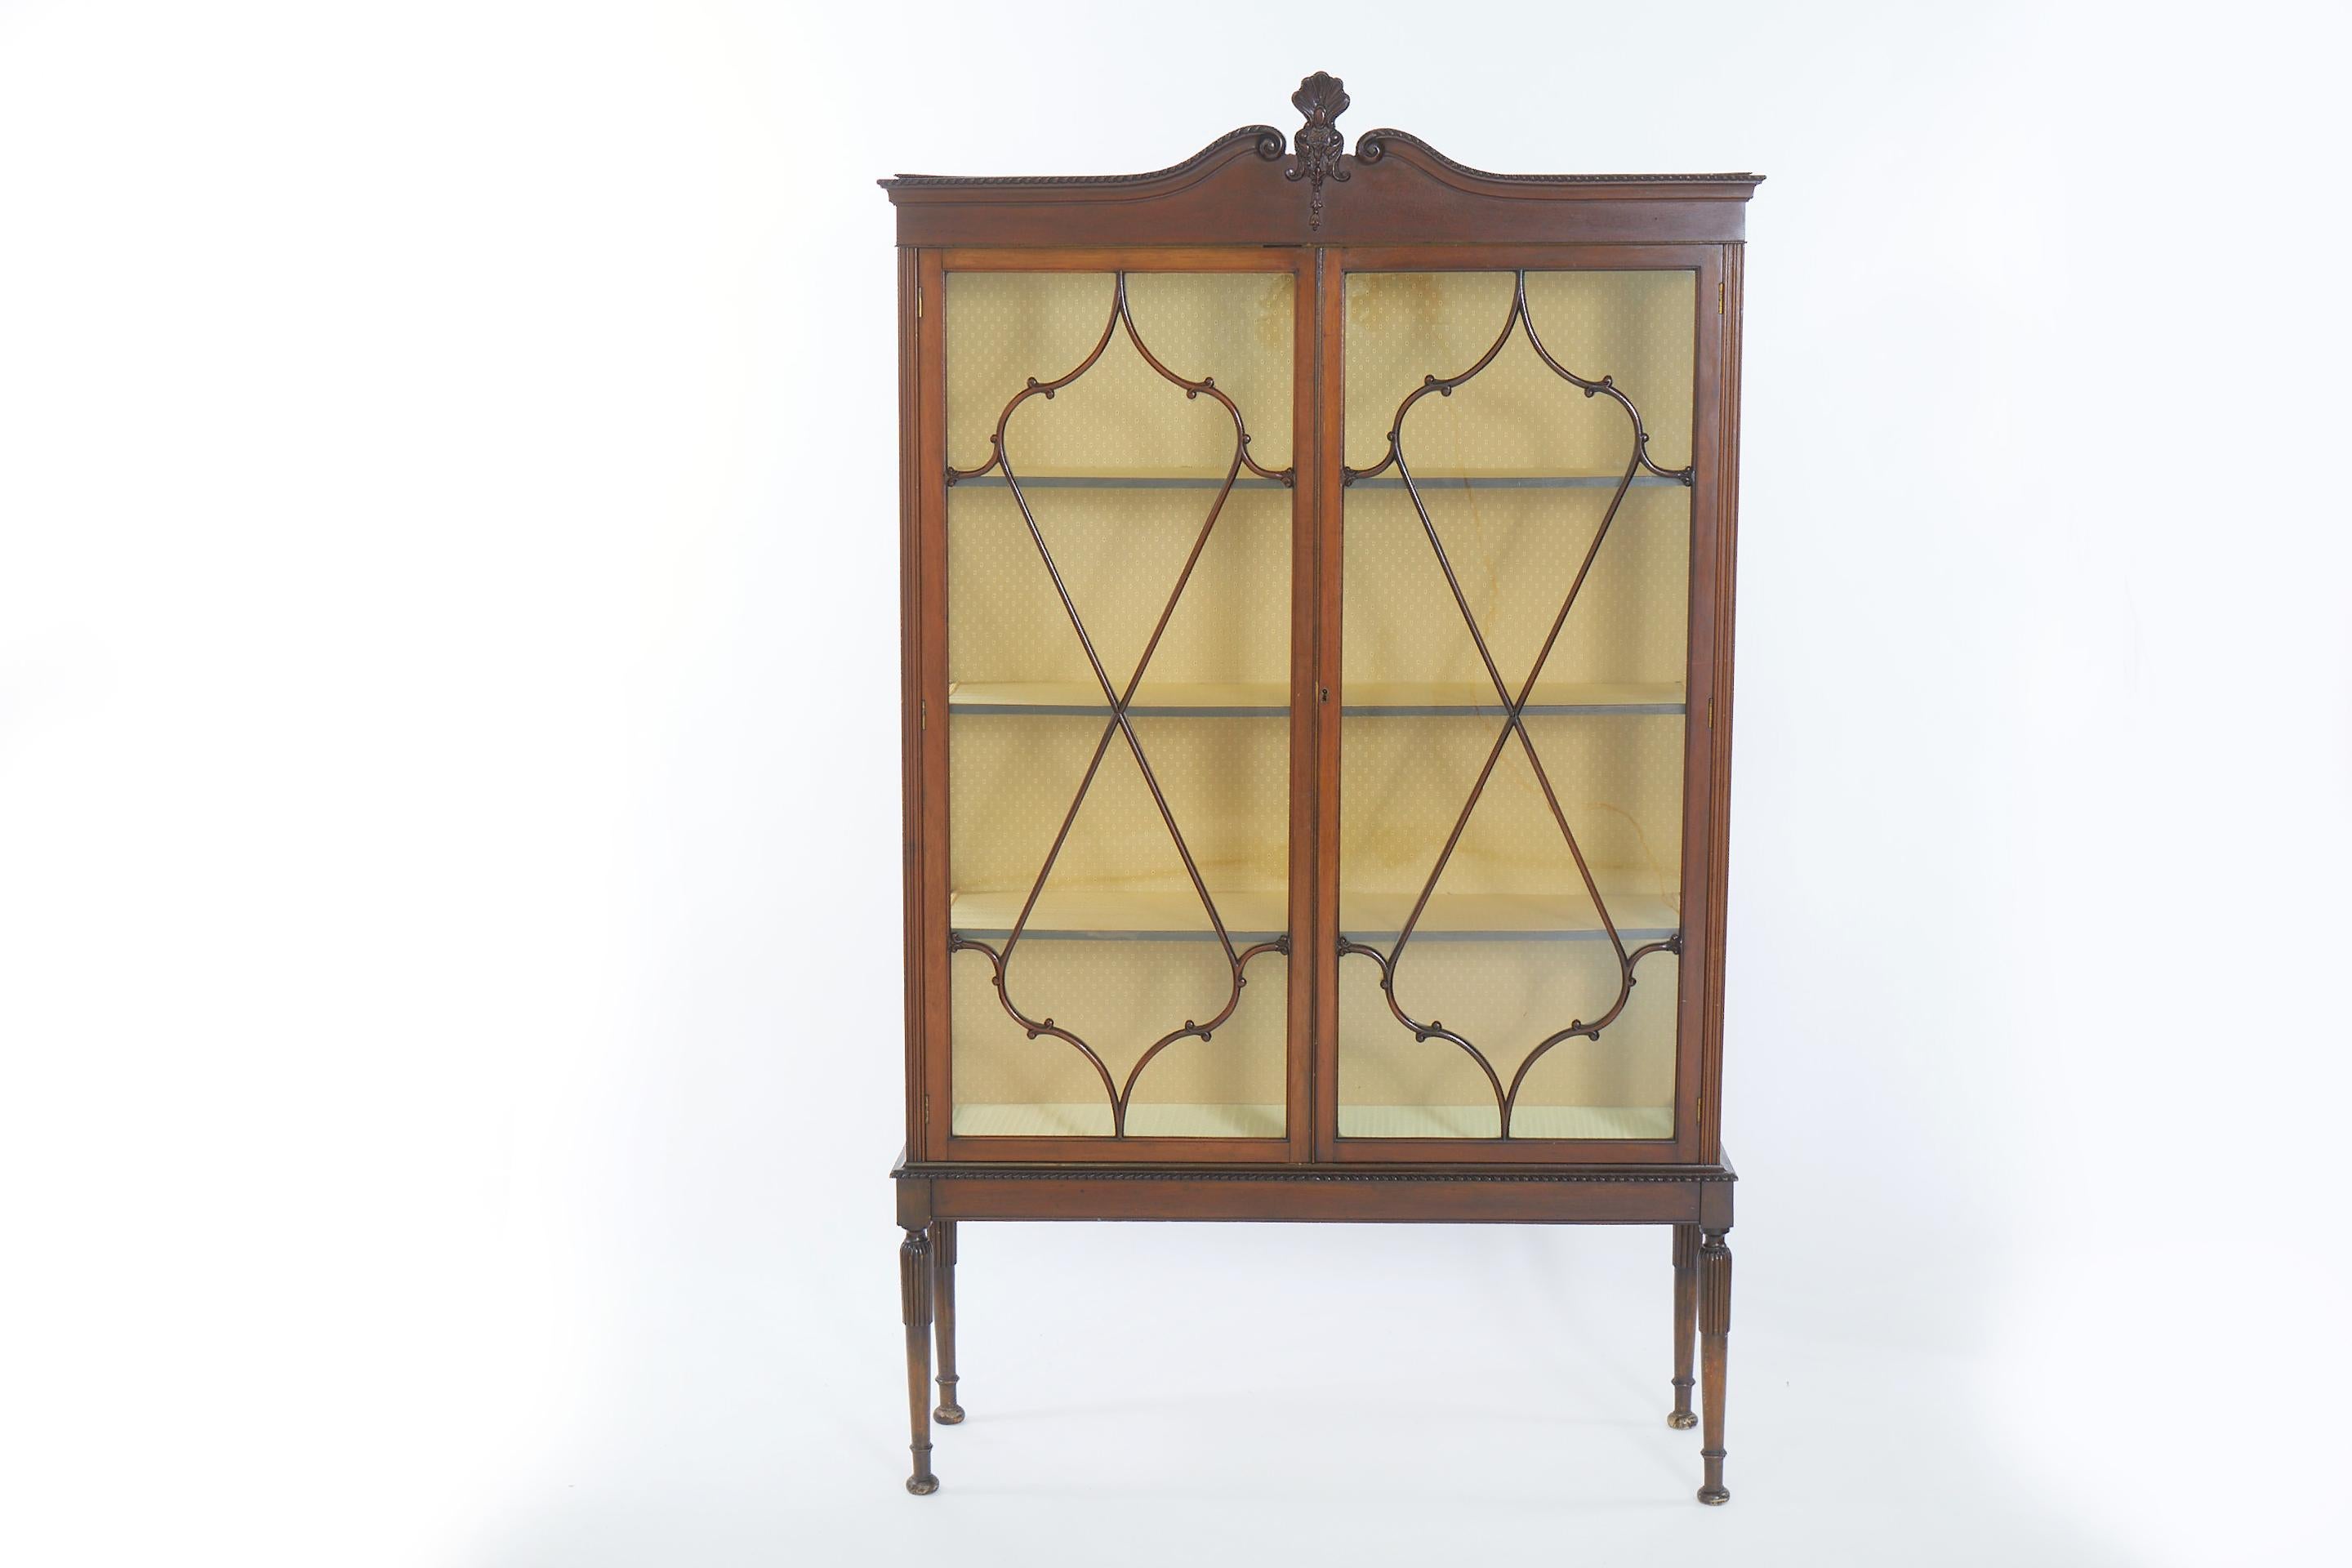 English Georgian style mahogany display china cabinet / bookcase . The cabinet features individual panes of glass, pencil inlay, solid wood construction, beautiful wood grain, with two swing doors. The cabinet is in good antique condition with